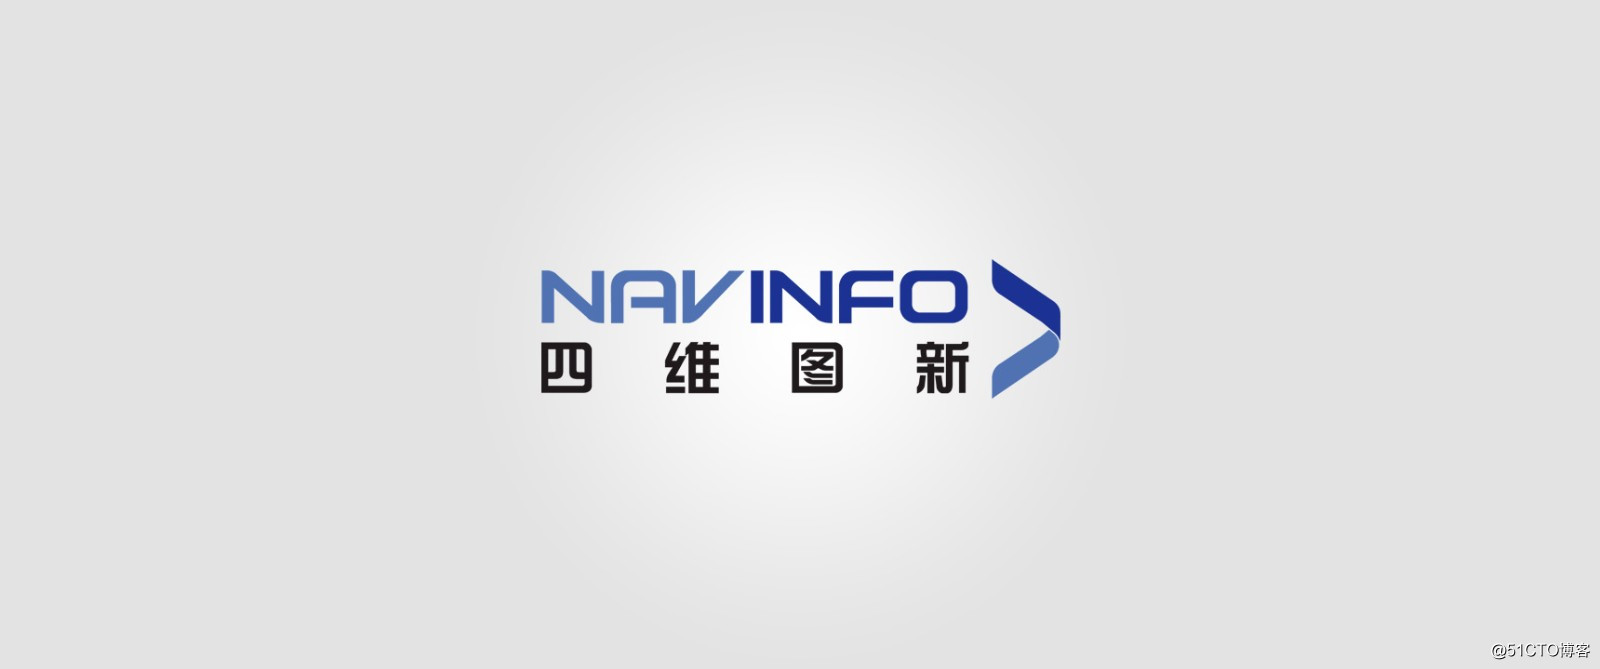 Speeding cloud contract with China's largest provider of digital map - NavInfo